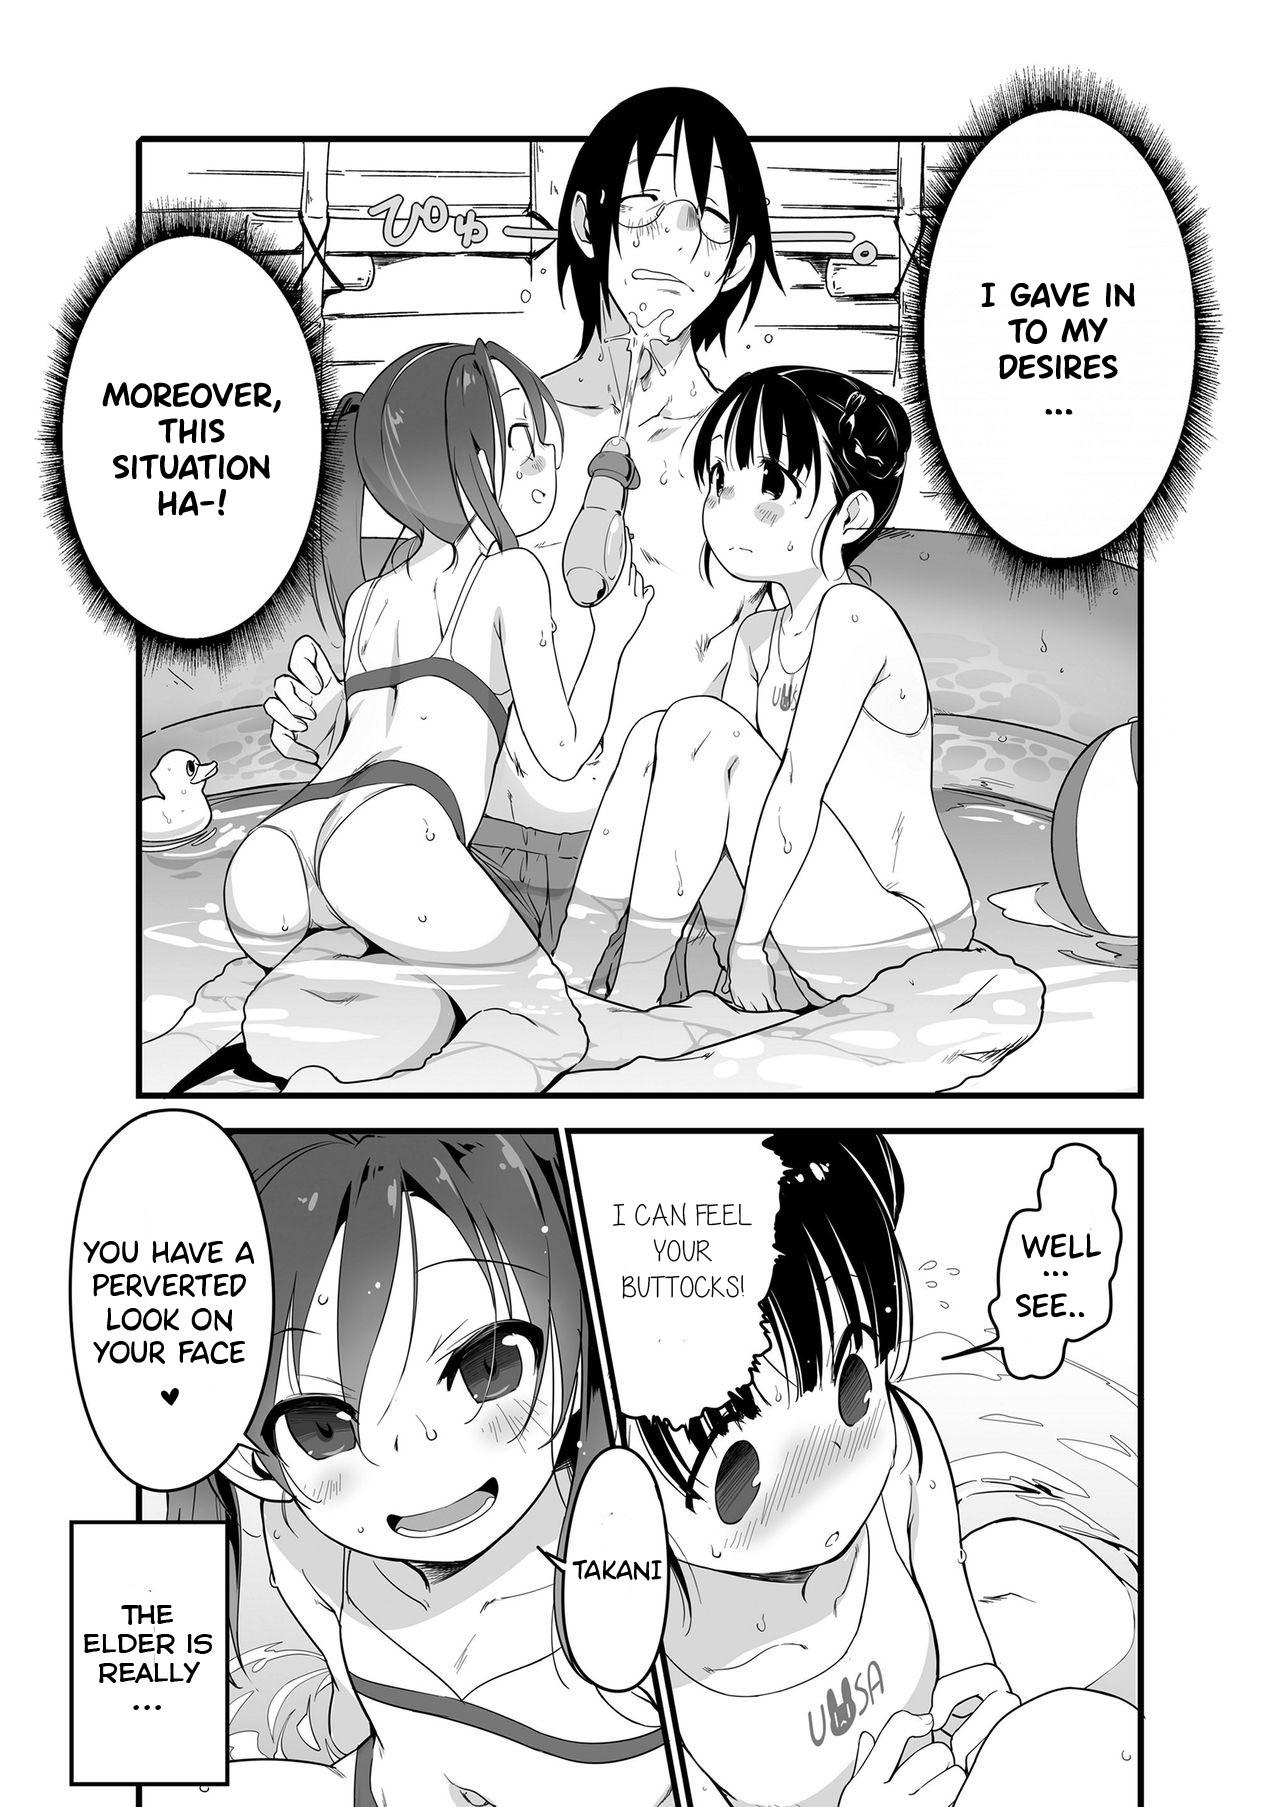 Women Sucking Uchiage Hanabi, Ane to Miruka? Imouto to Miruka? | Fireworks, Should we see it with the elder sister or the younger sister? Banging - Page 6